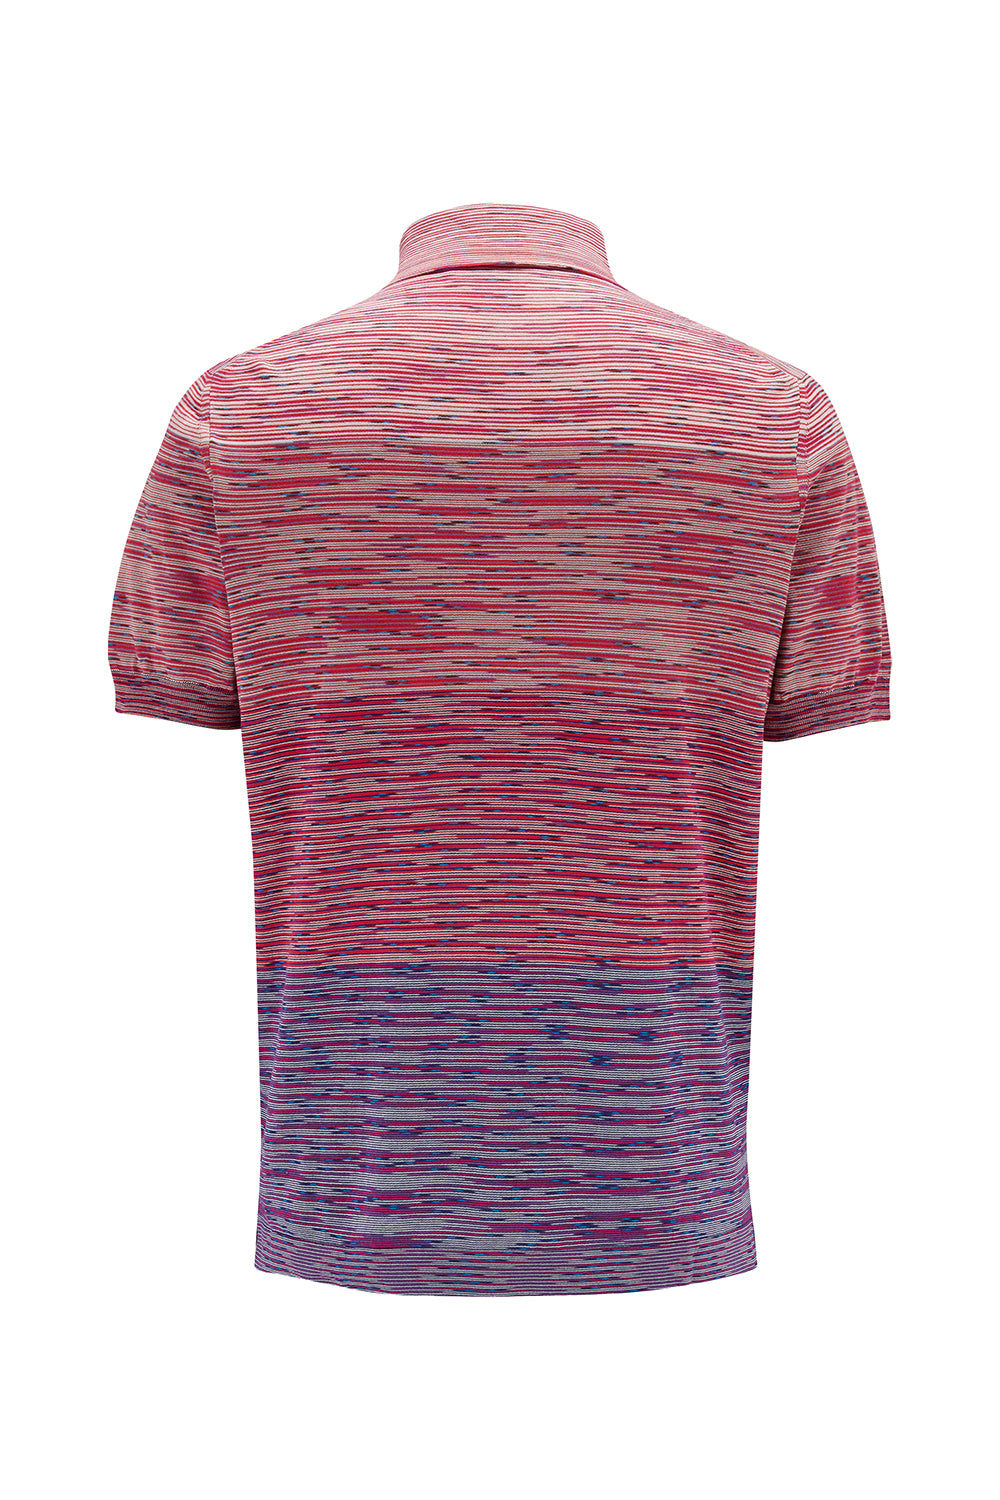 Missoni Men’s Knitted Stripe Polo Shirt Pink - Back View